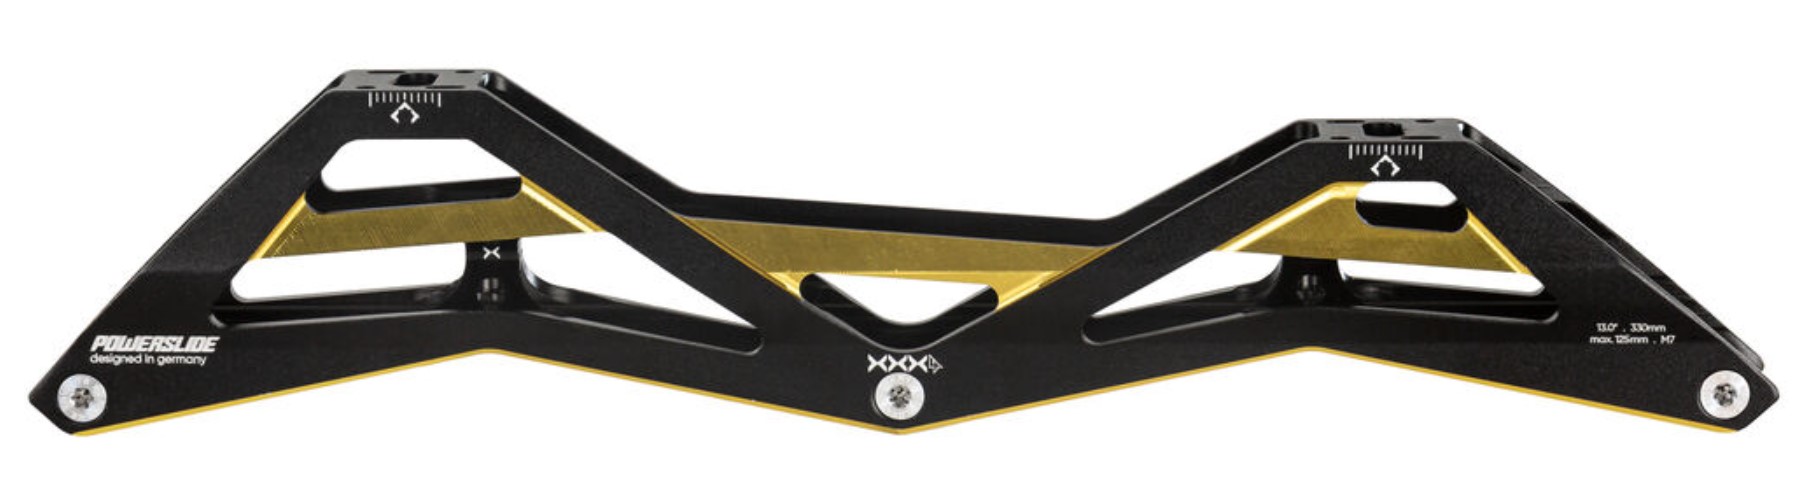 Powerslide 3X race frame 3x125 with 195 mounting in black with gold accents